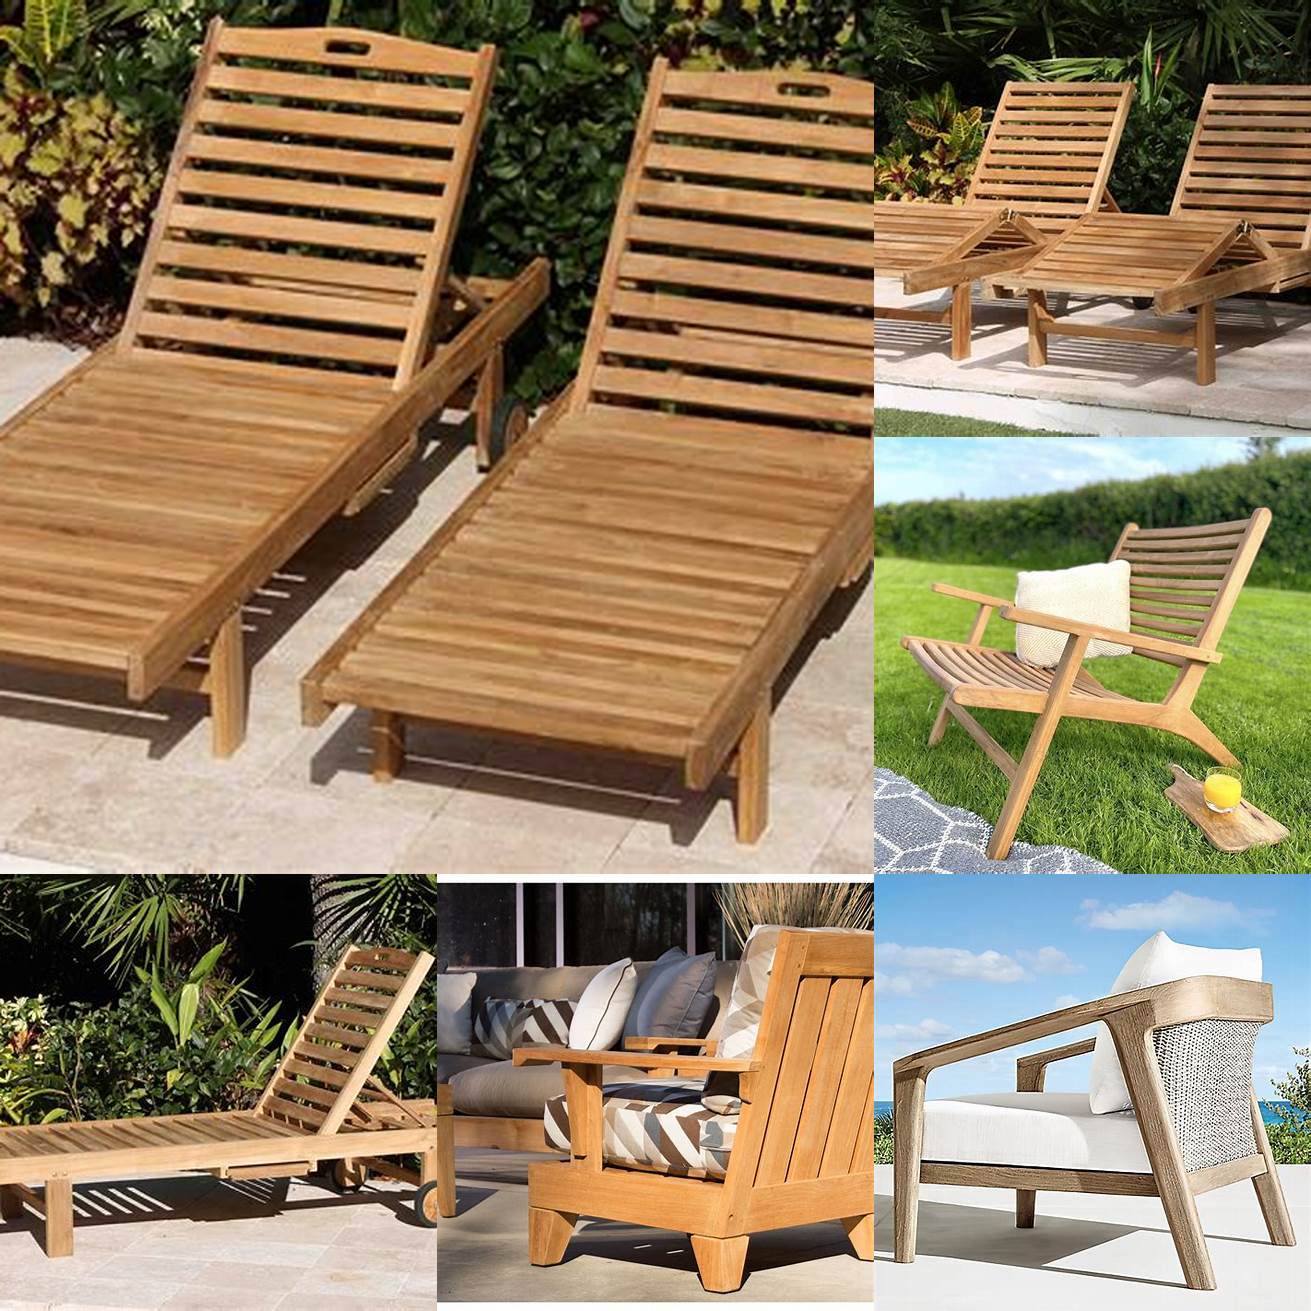 Synthetic teak loungers